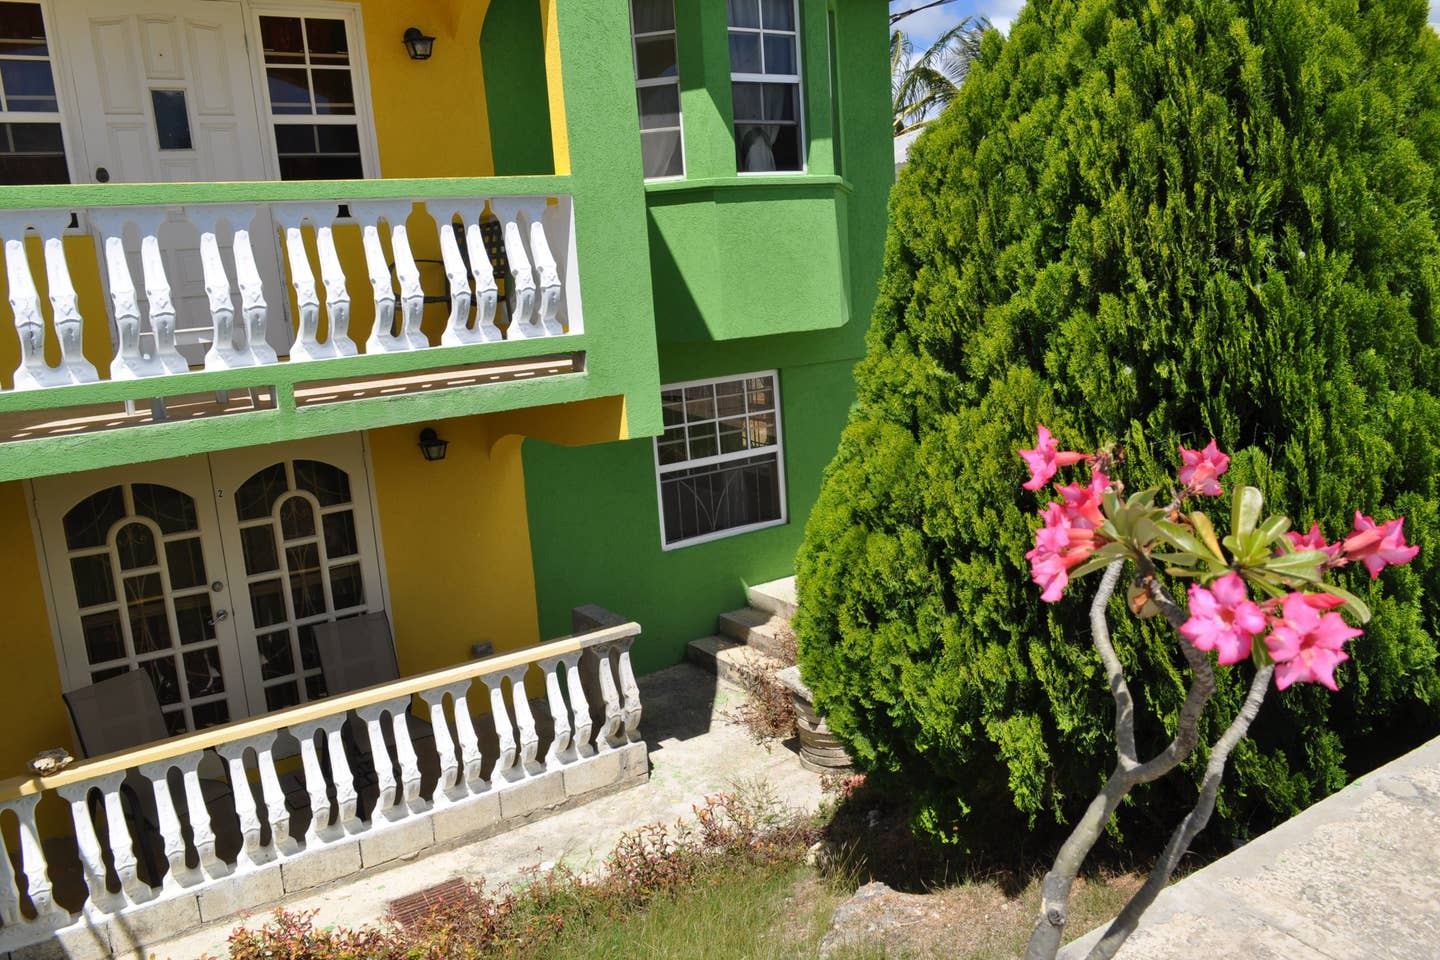 How We Found the “Perfect” House/Apartment in Barbados